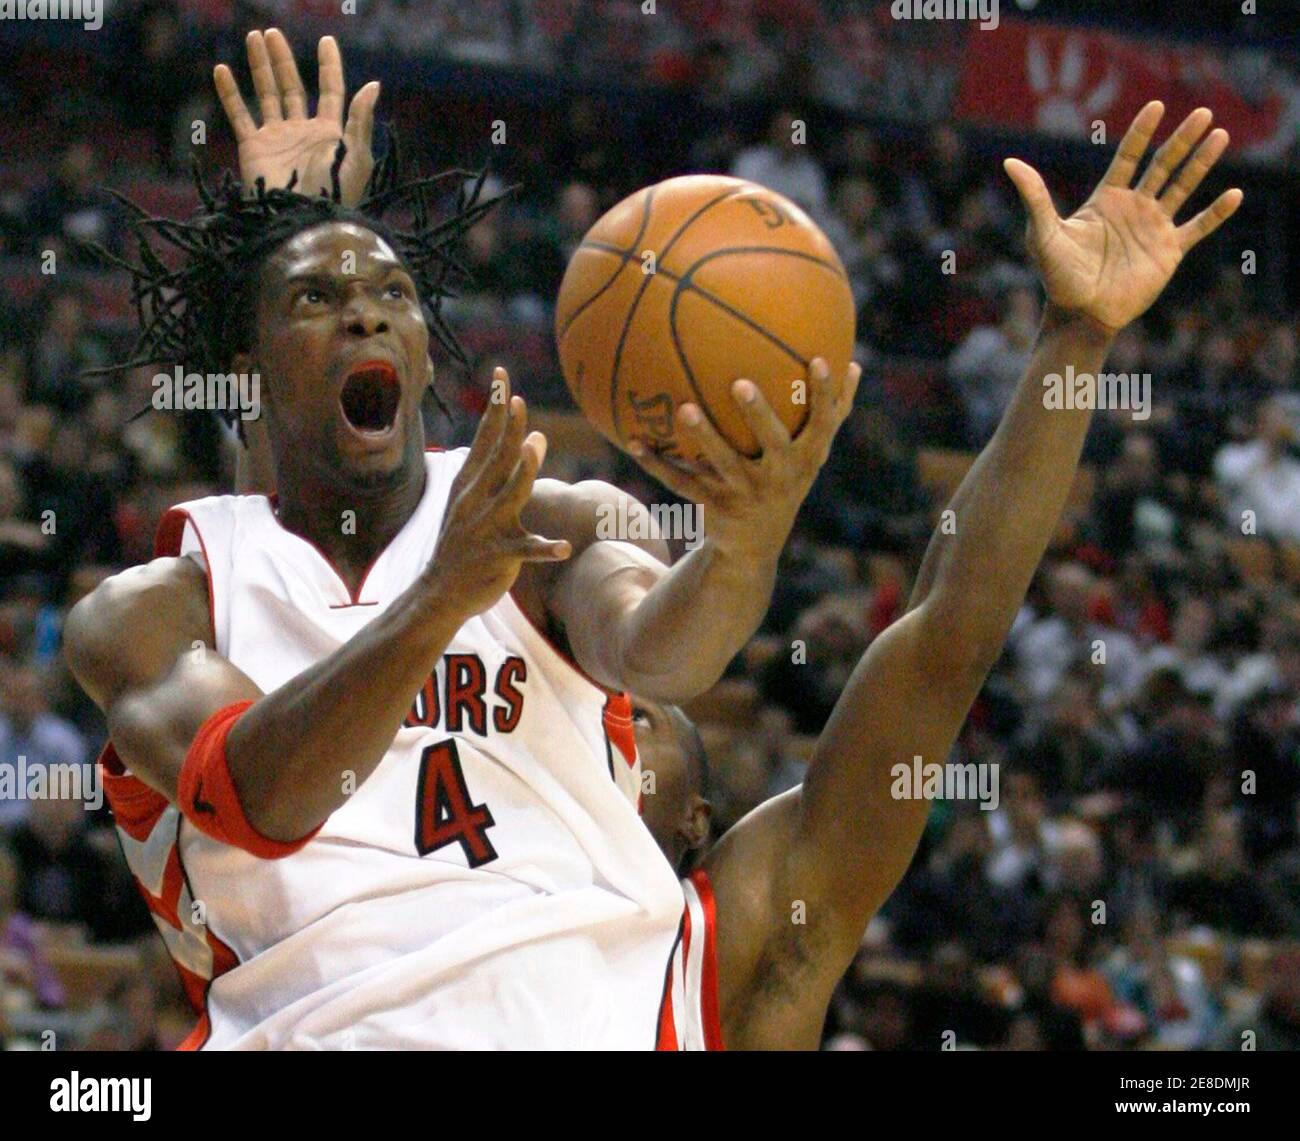 Toronto Raptors forward Chris Bosh goes to the basket against the Houston  Rockets during the first half of their pre-season NBA basketball game in  Toronto in this October 15, 2009 file photo.